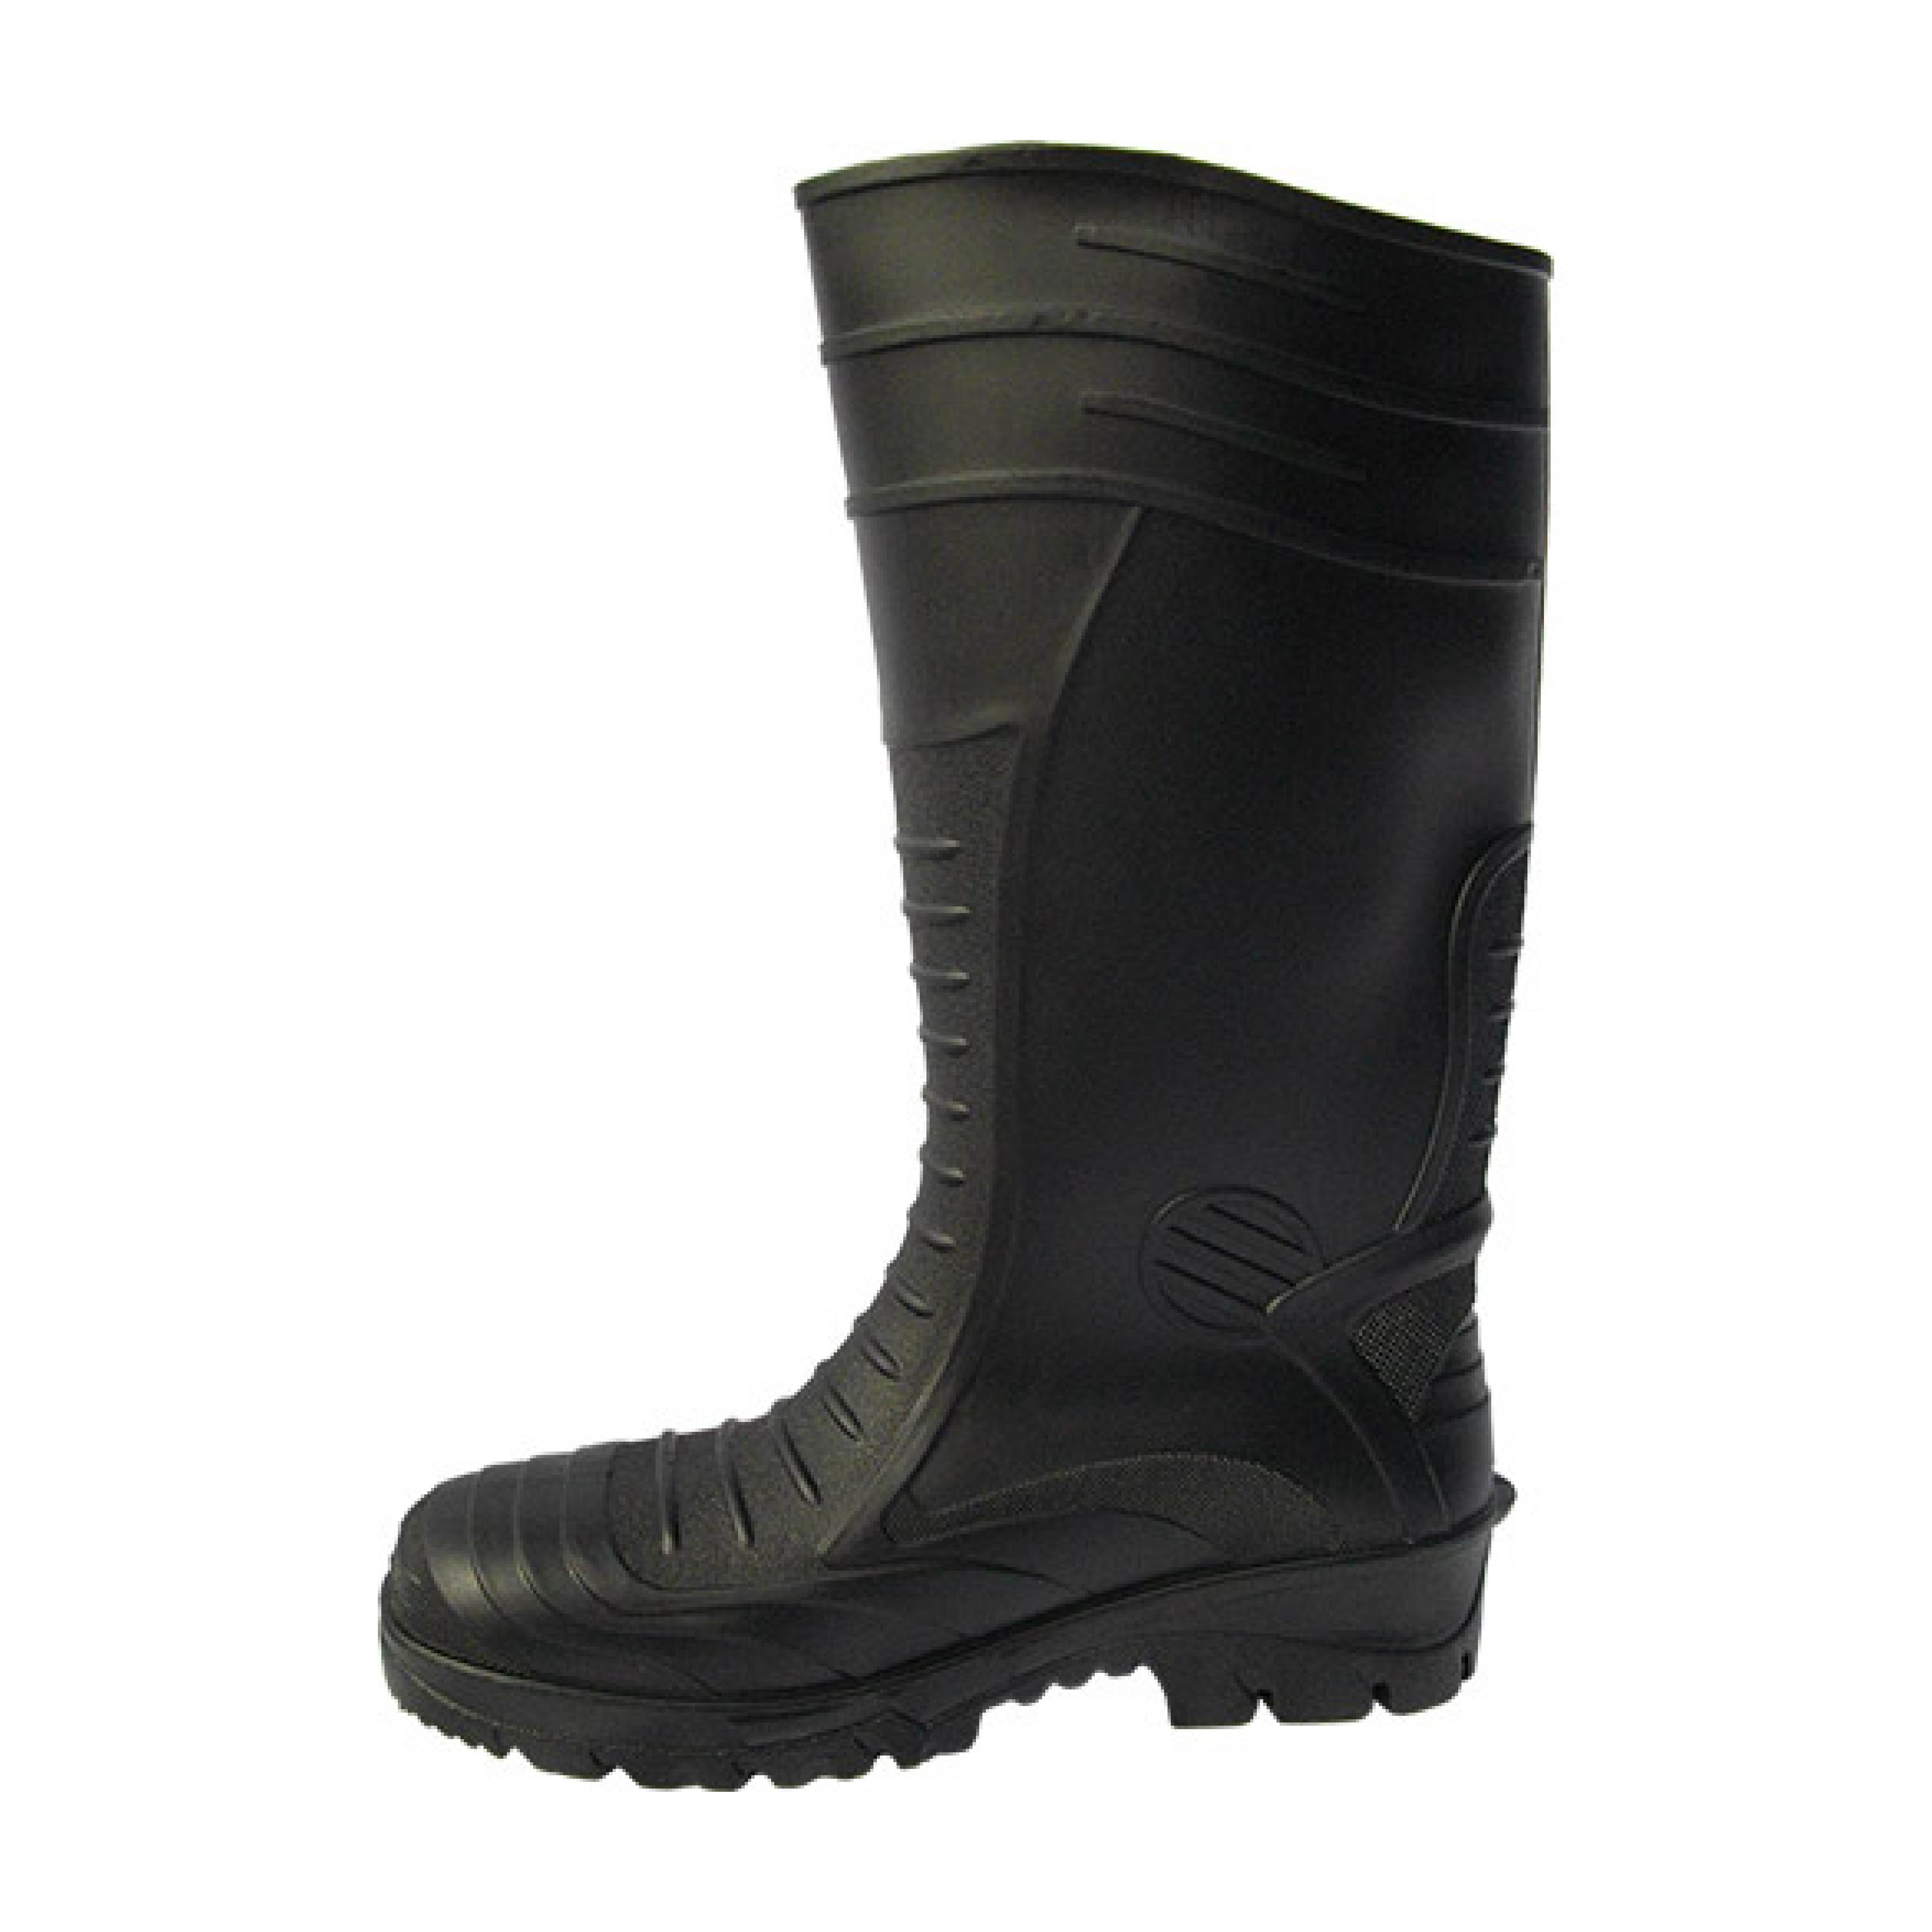 Black PVC Safety Gumboot Size 8 (1 pair)